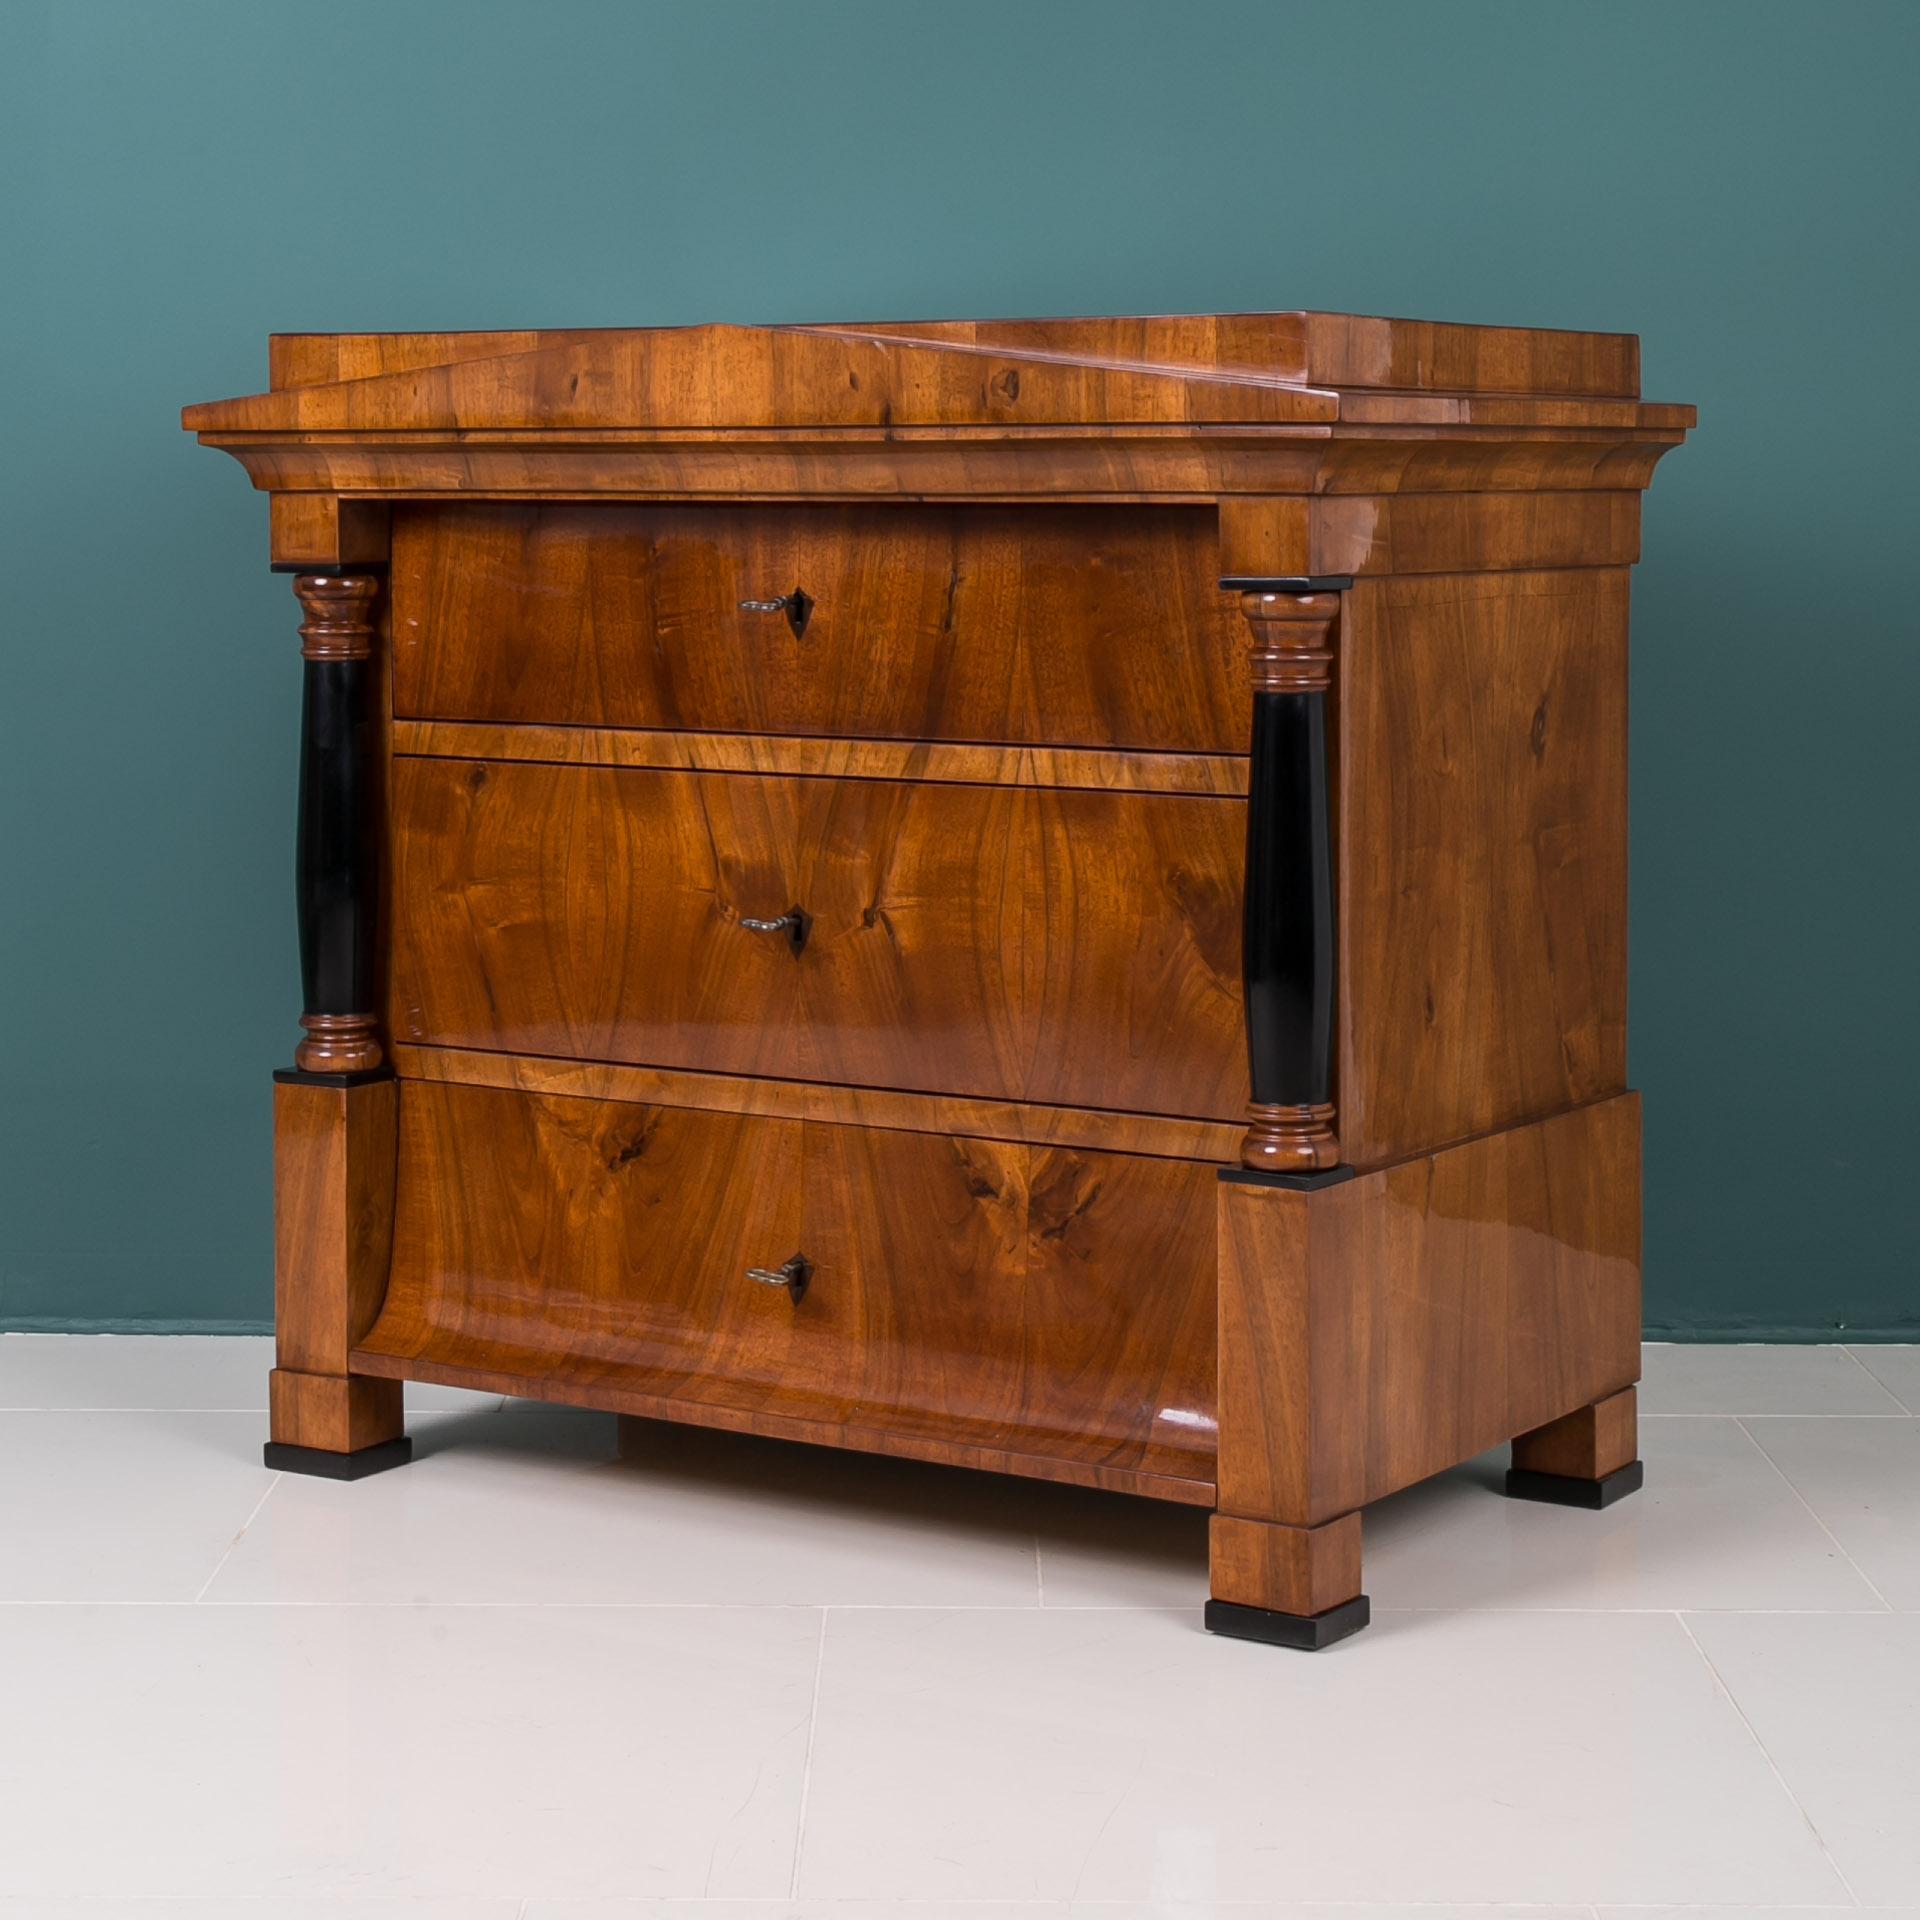 Biedermeier style chest of drawers from 19th century. This piece of furniture comes from Germany. It was made of coniferous wood and veneered with beautiful walnut wood. It features 3 spacious drawers of different sizes and unique decorative